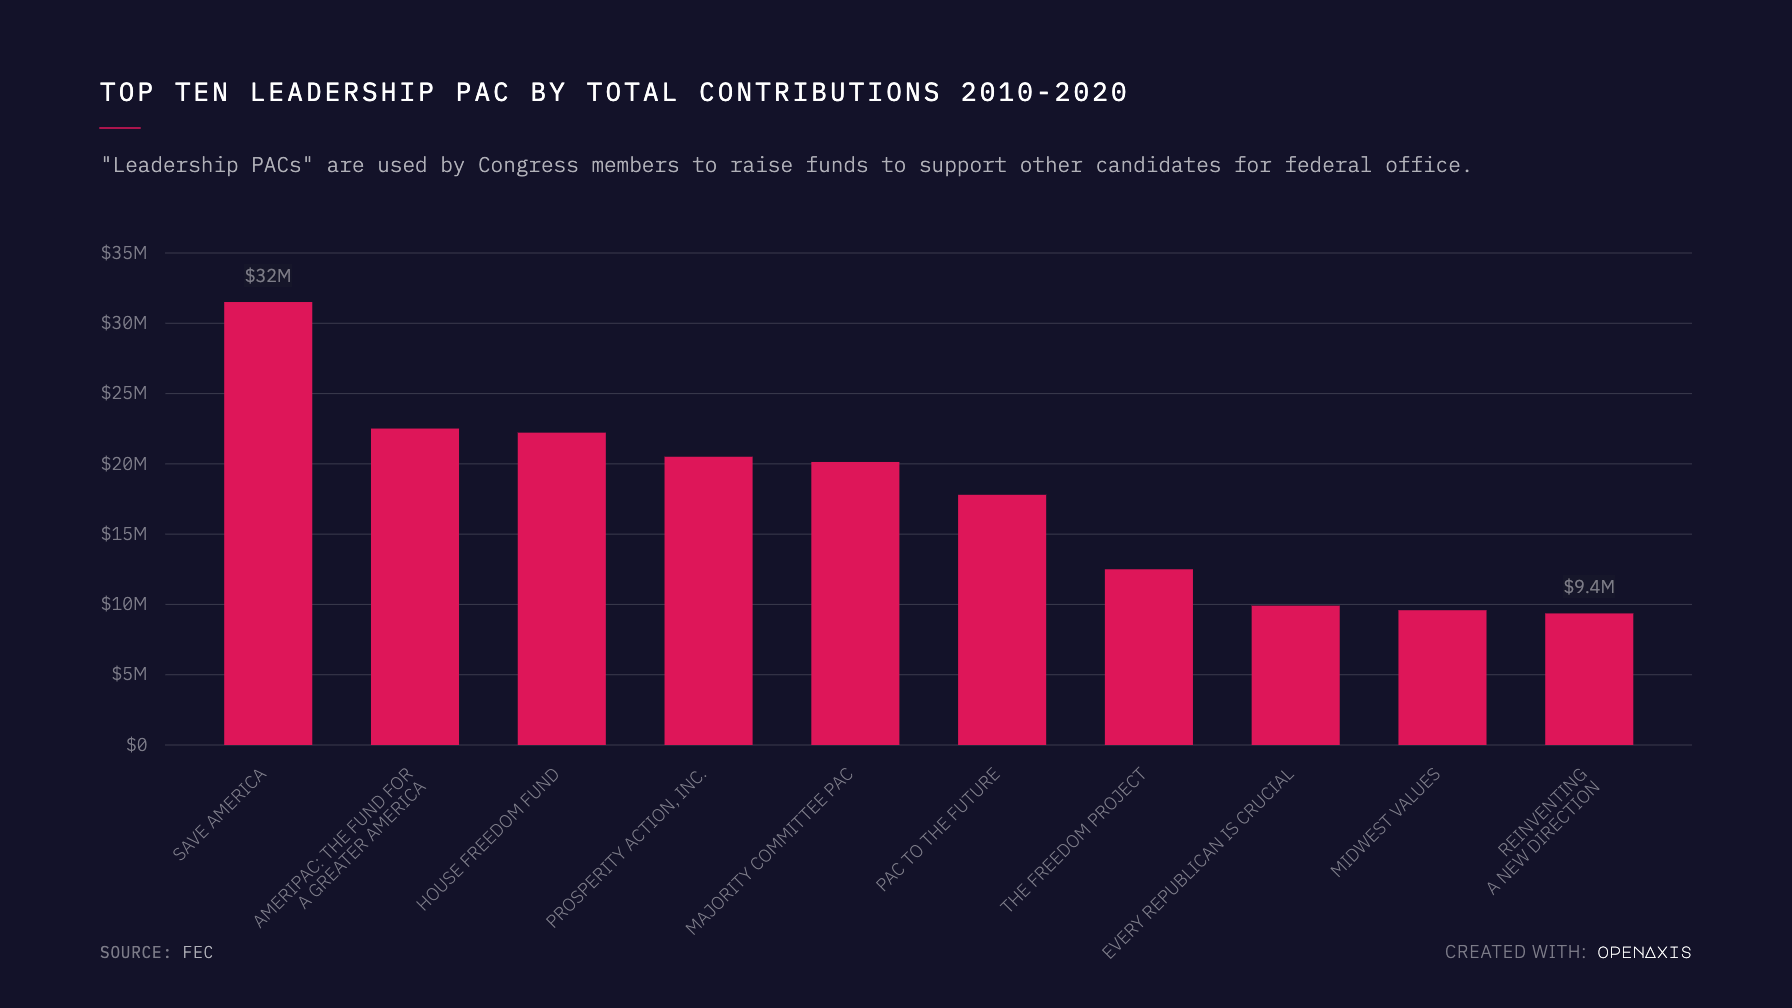 Top Ten Leadership PACs by total contributions 2010-2020